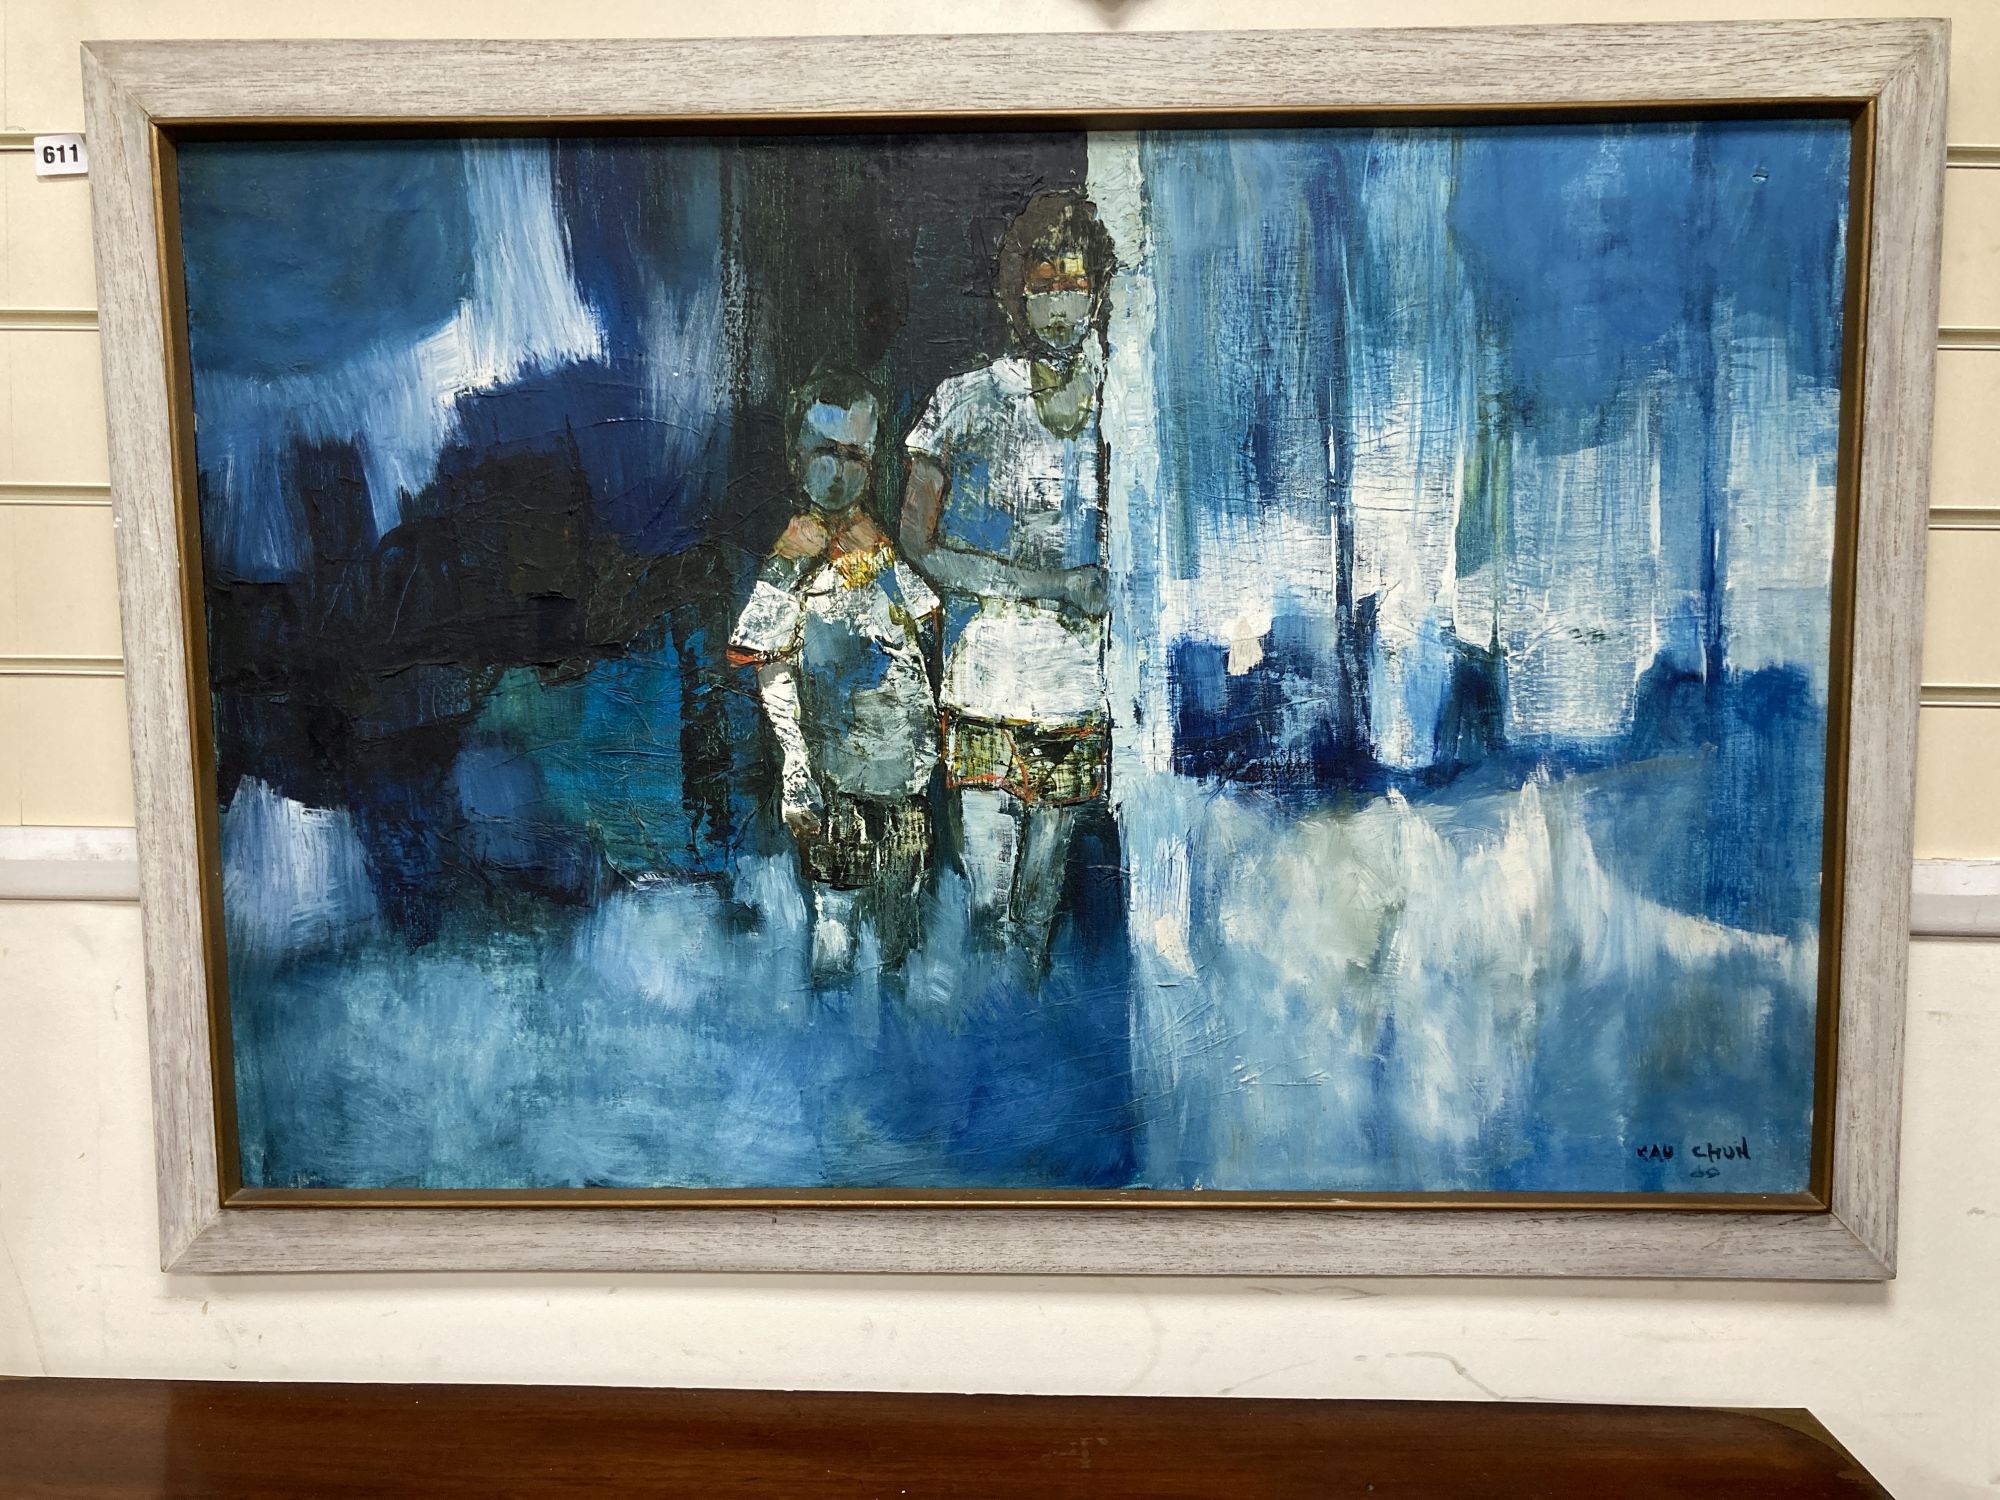 Kau Chun, oil on canvas, Figures in a stylised landscape, signed, 60 x 91cm